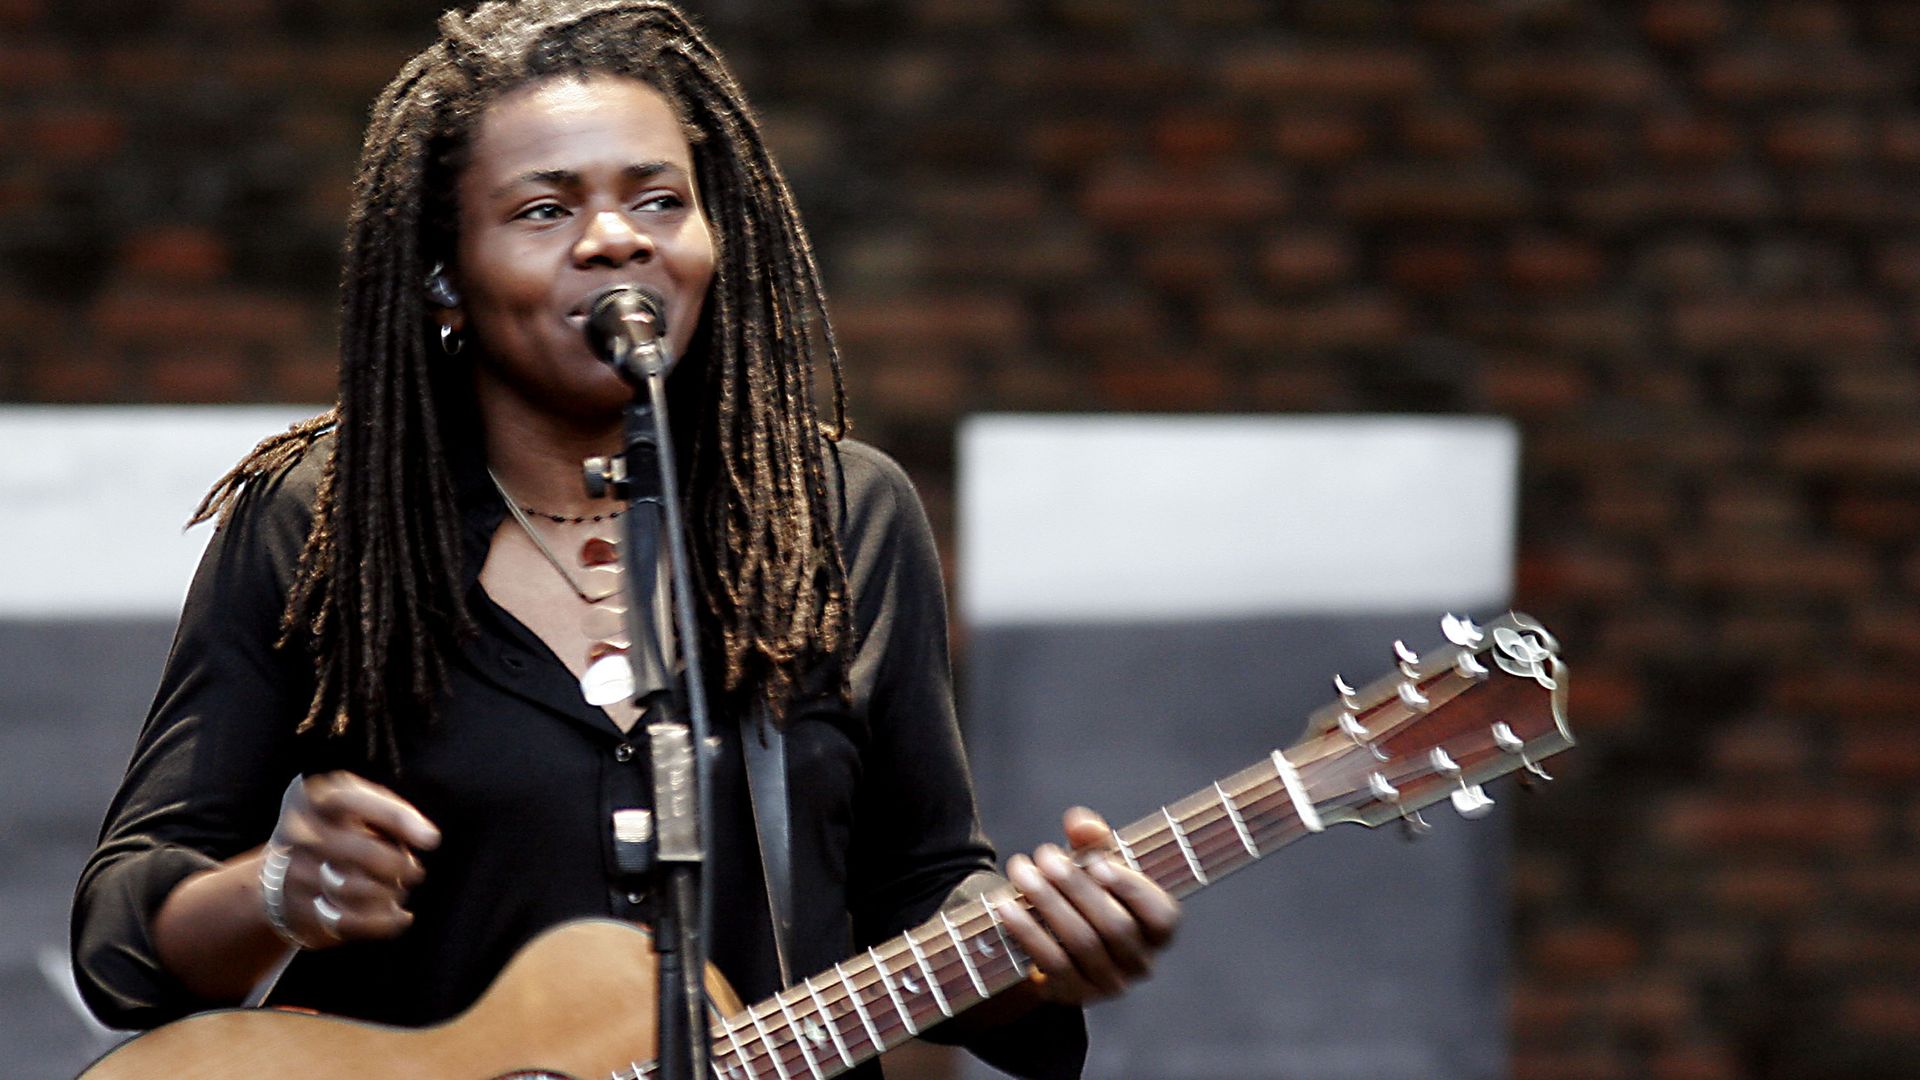 Tracy Chapman singing on stage.